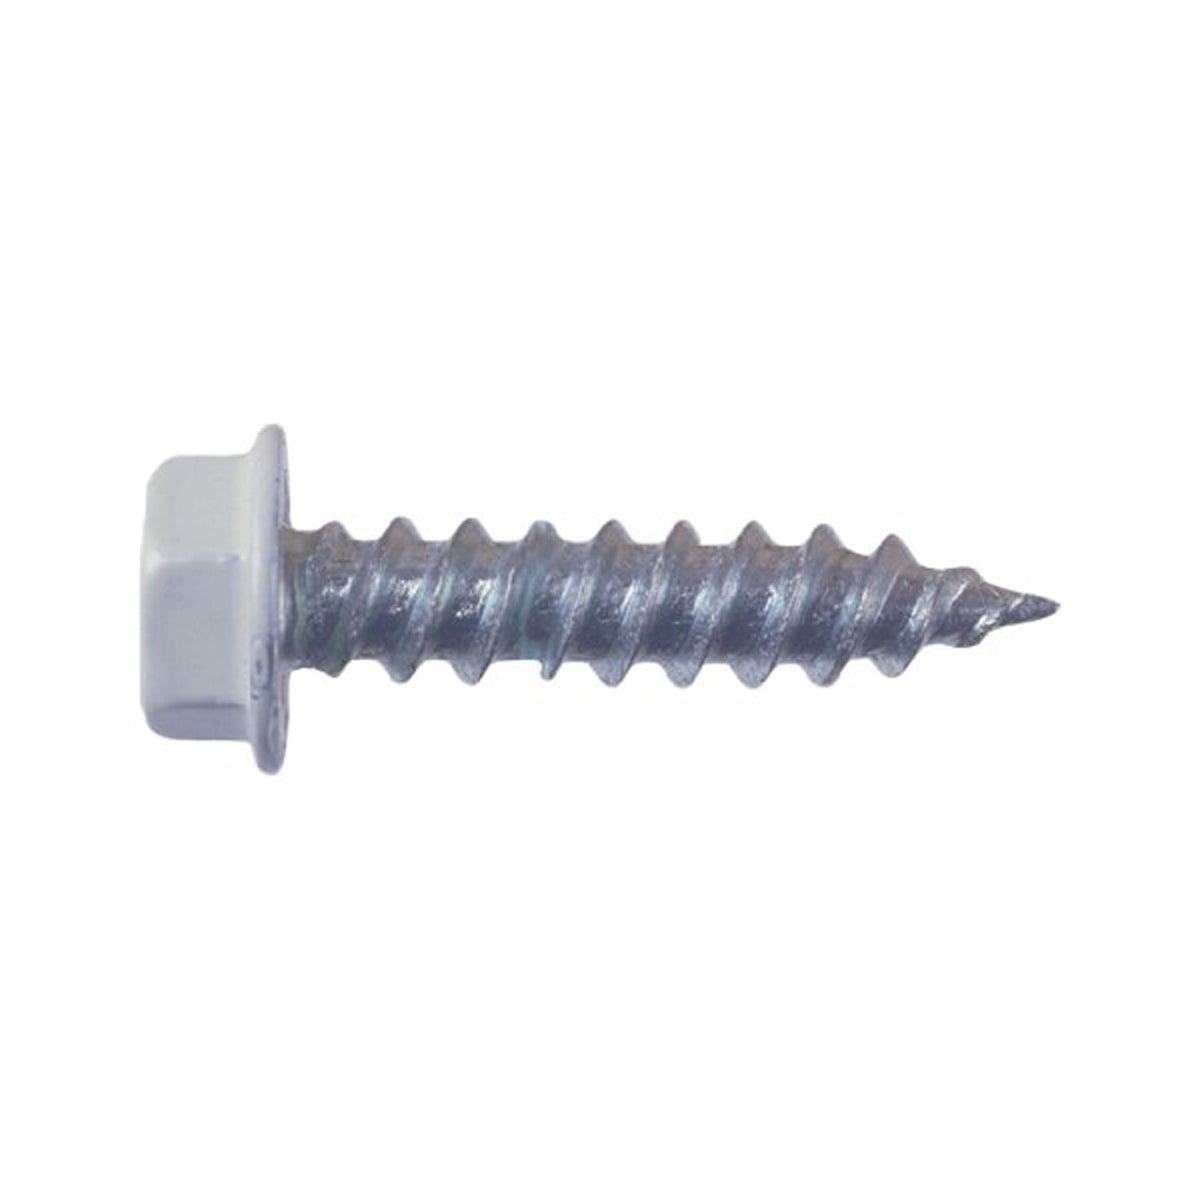 AP Products 012-TR50 W 8 X 1-1/4 MH/RV Unslotted Hex Washer Head Screw, Pack of 50 - 1-1/4", White